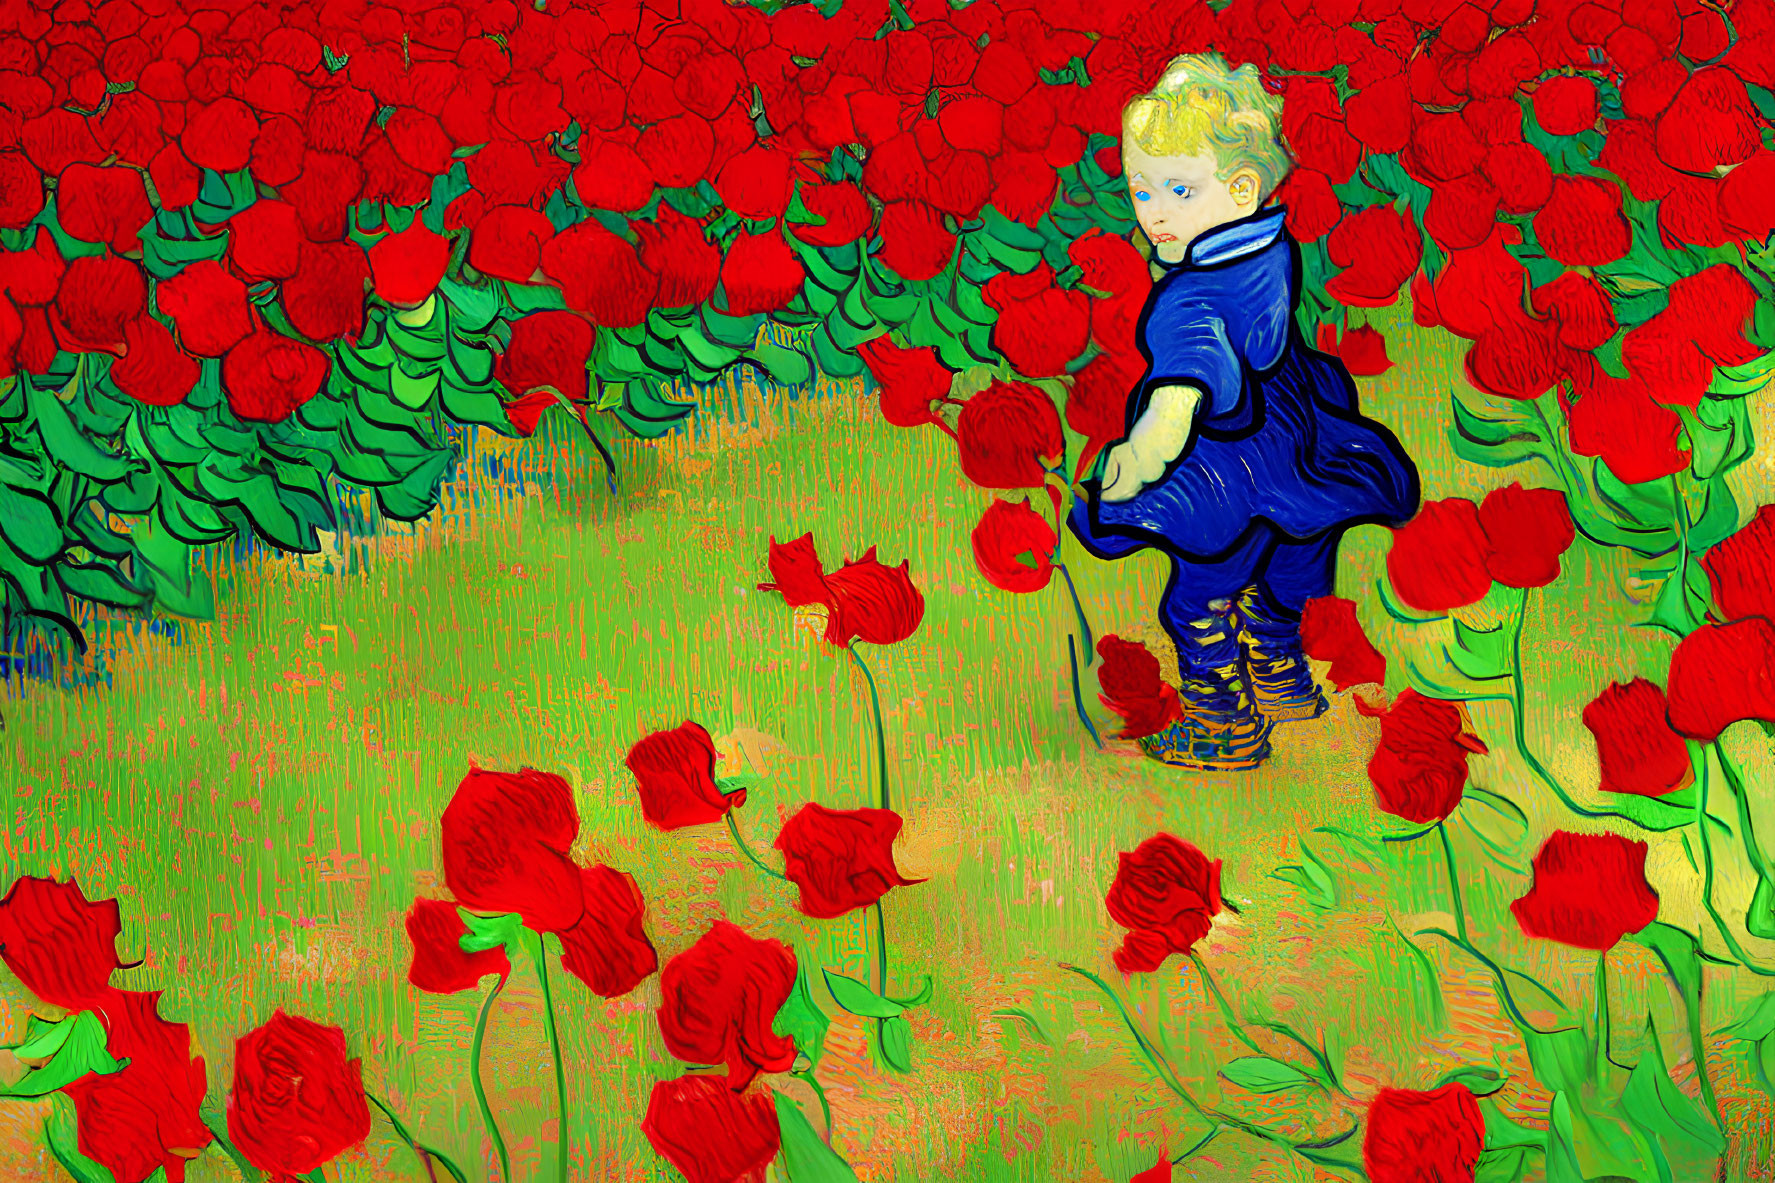 Child in Blue Outfit Among Vibrant Red Poppies with Thoughtful Expression